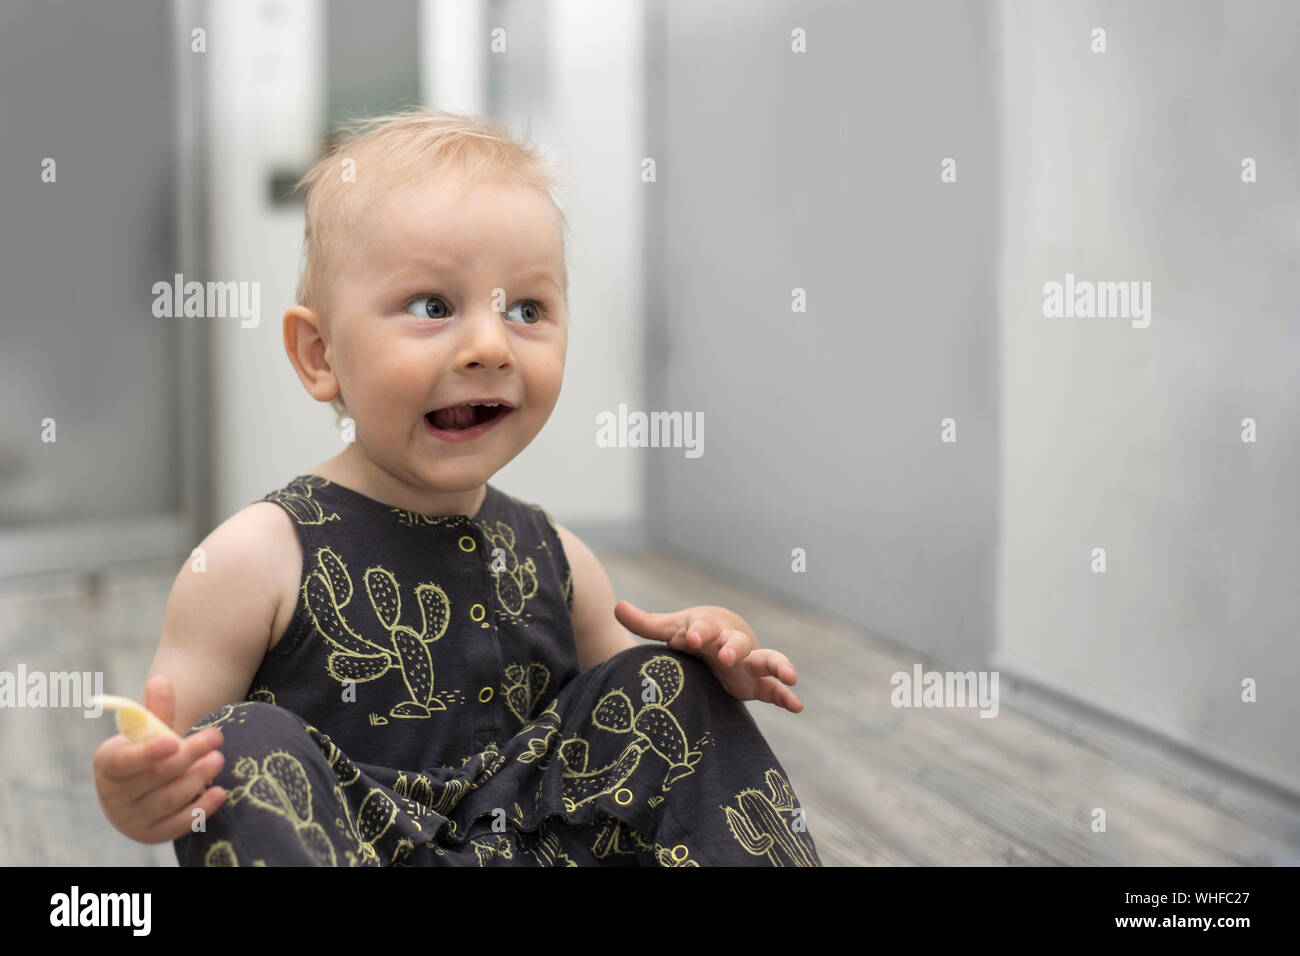 Surprised Little Baby on Floor in Home Interior Stock Photo